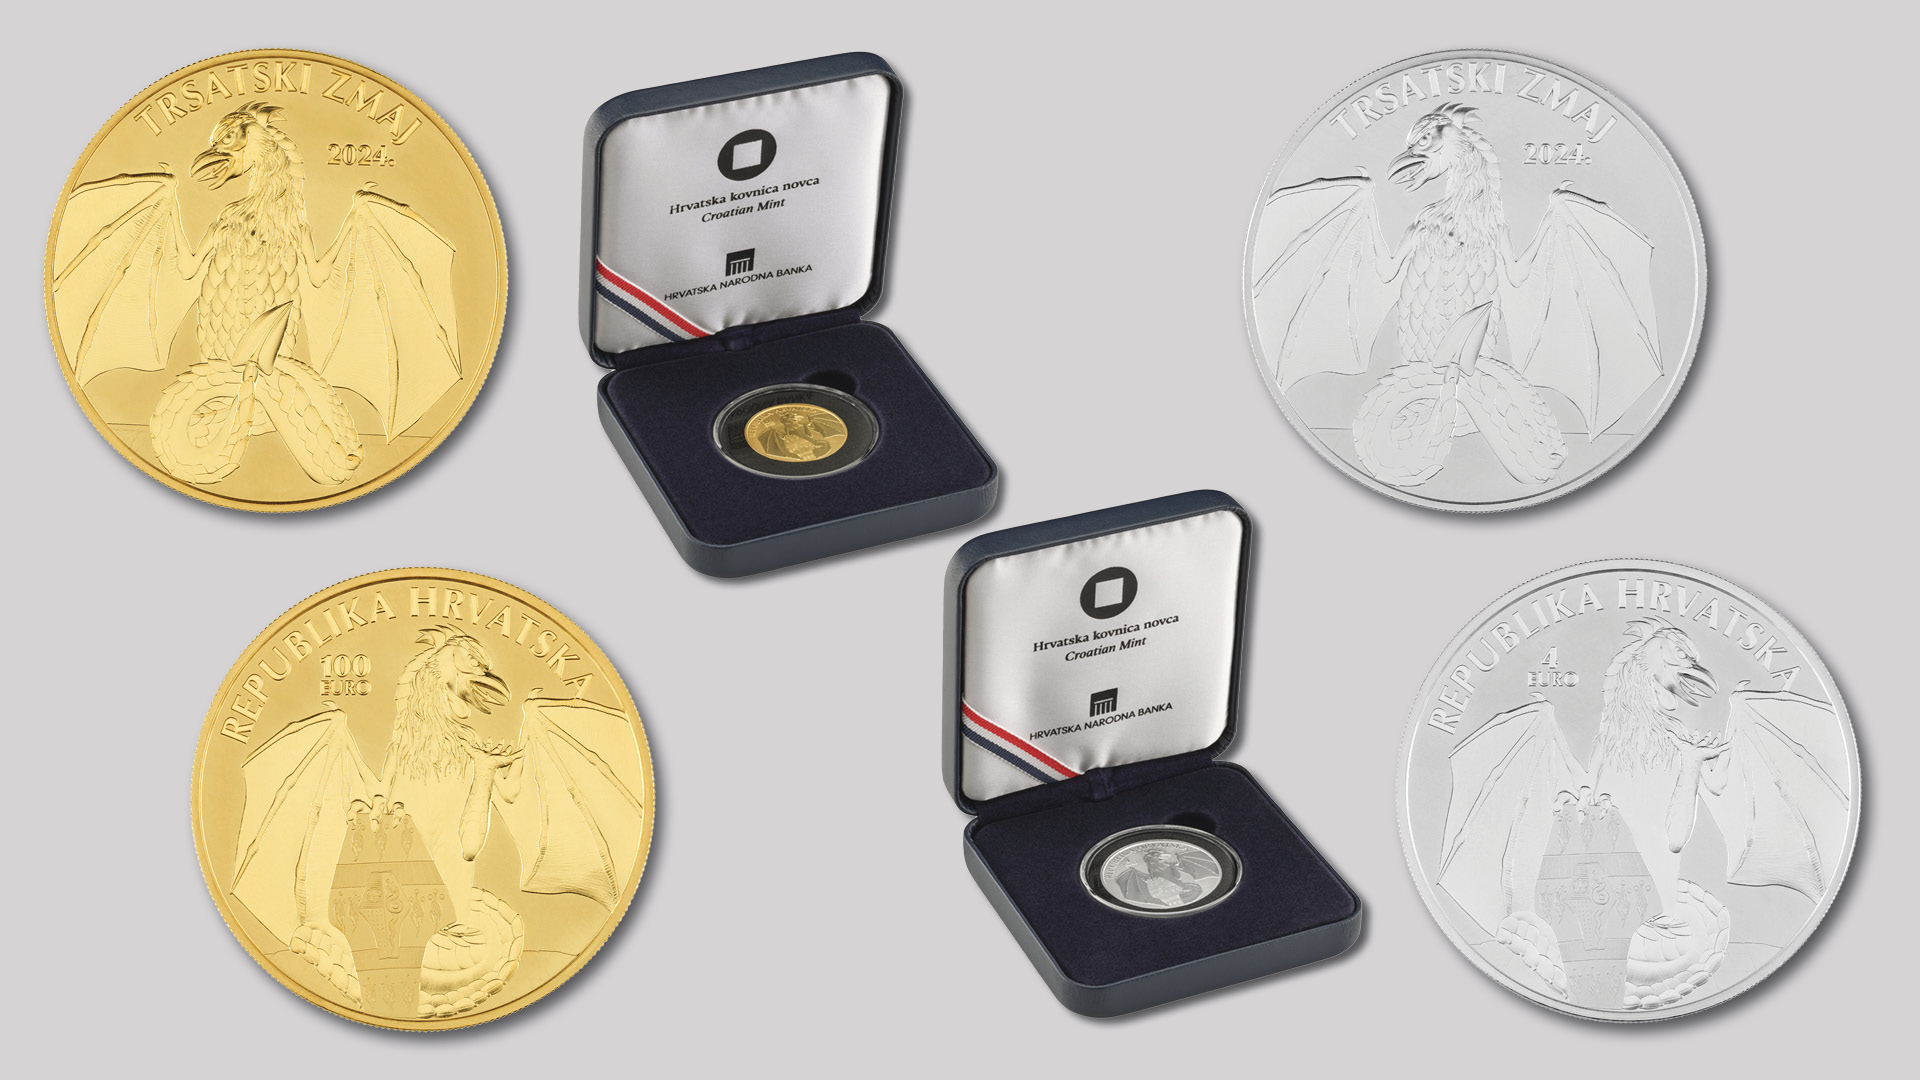 CNB issues “Trsat Dragon” gold and silver numismatic coins